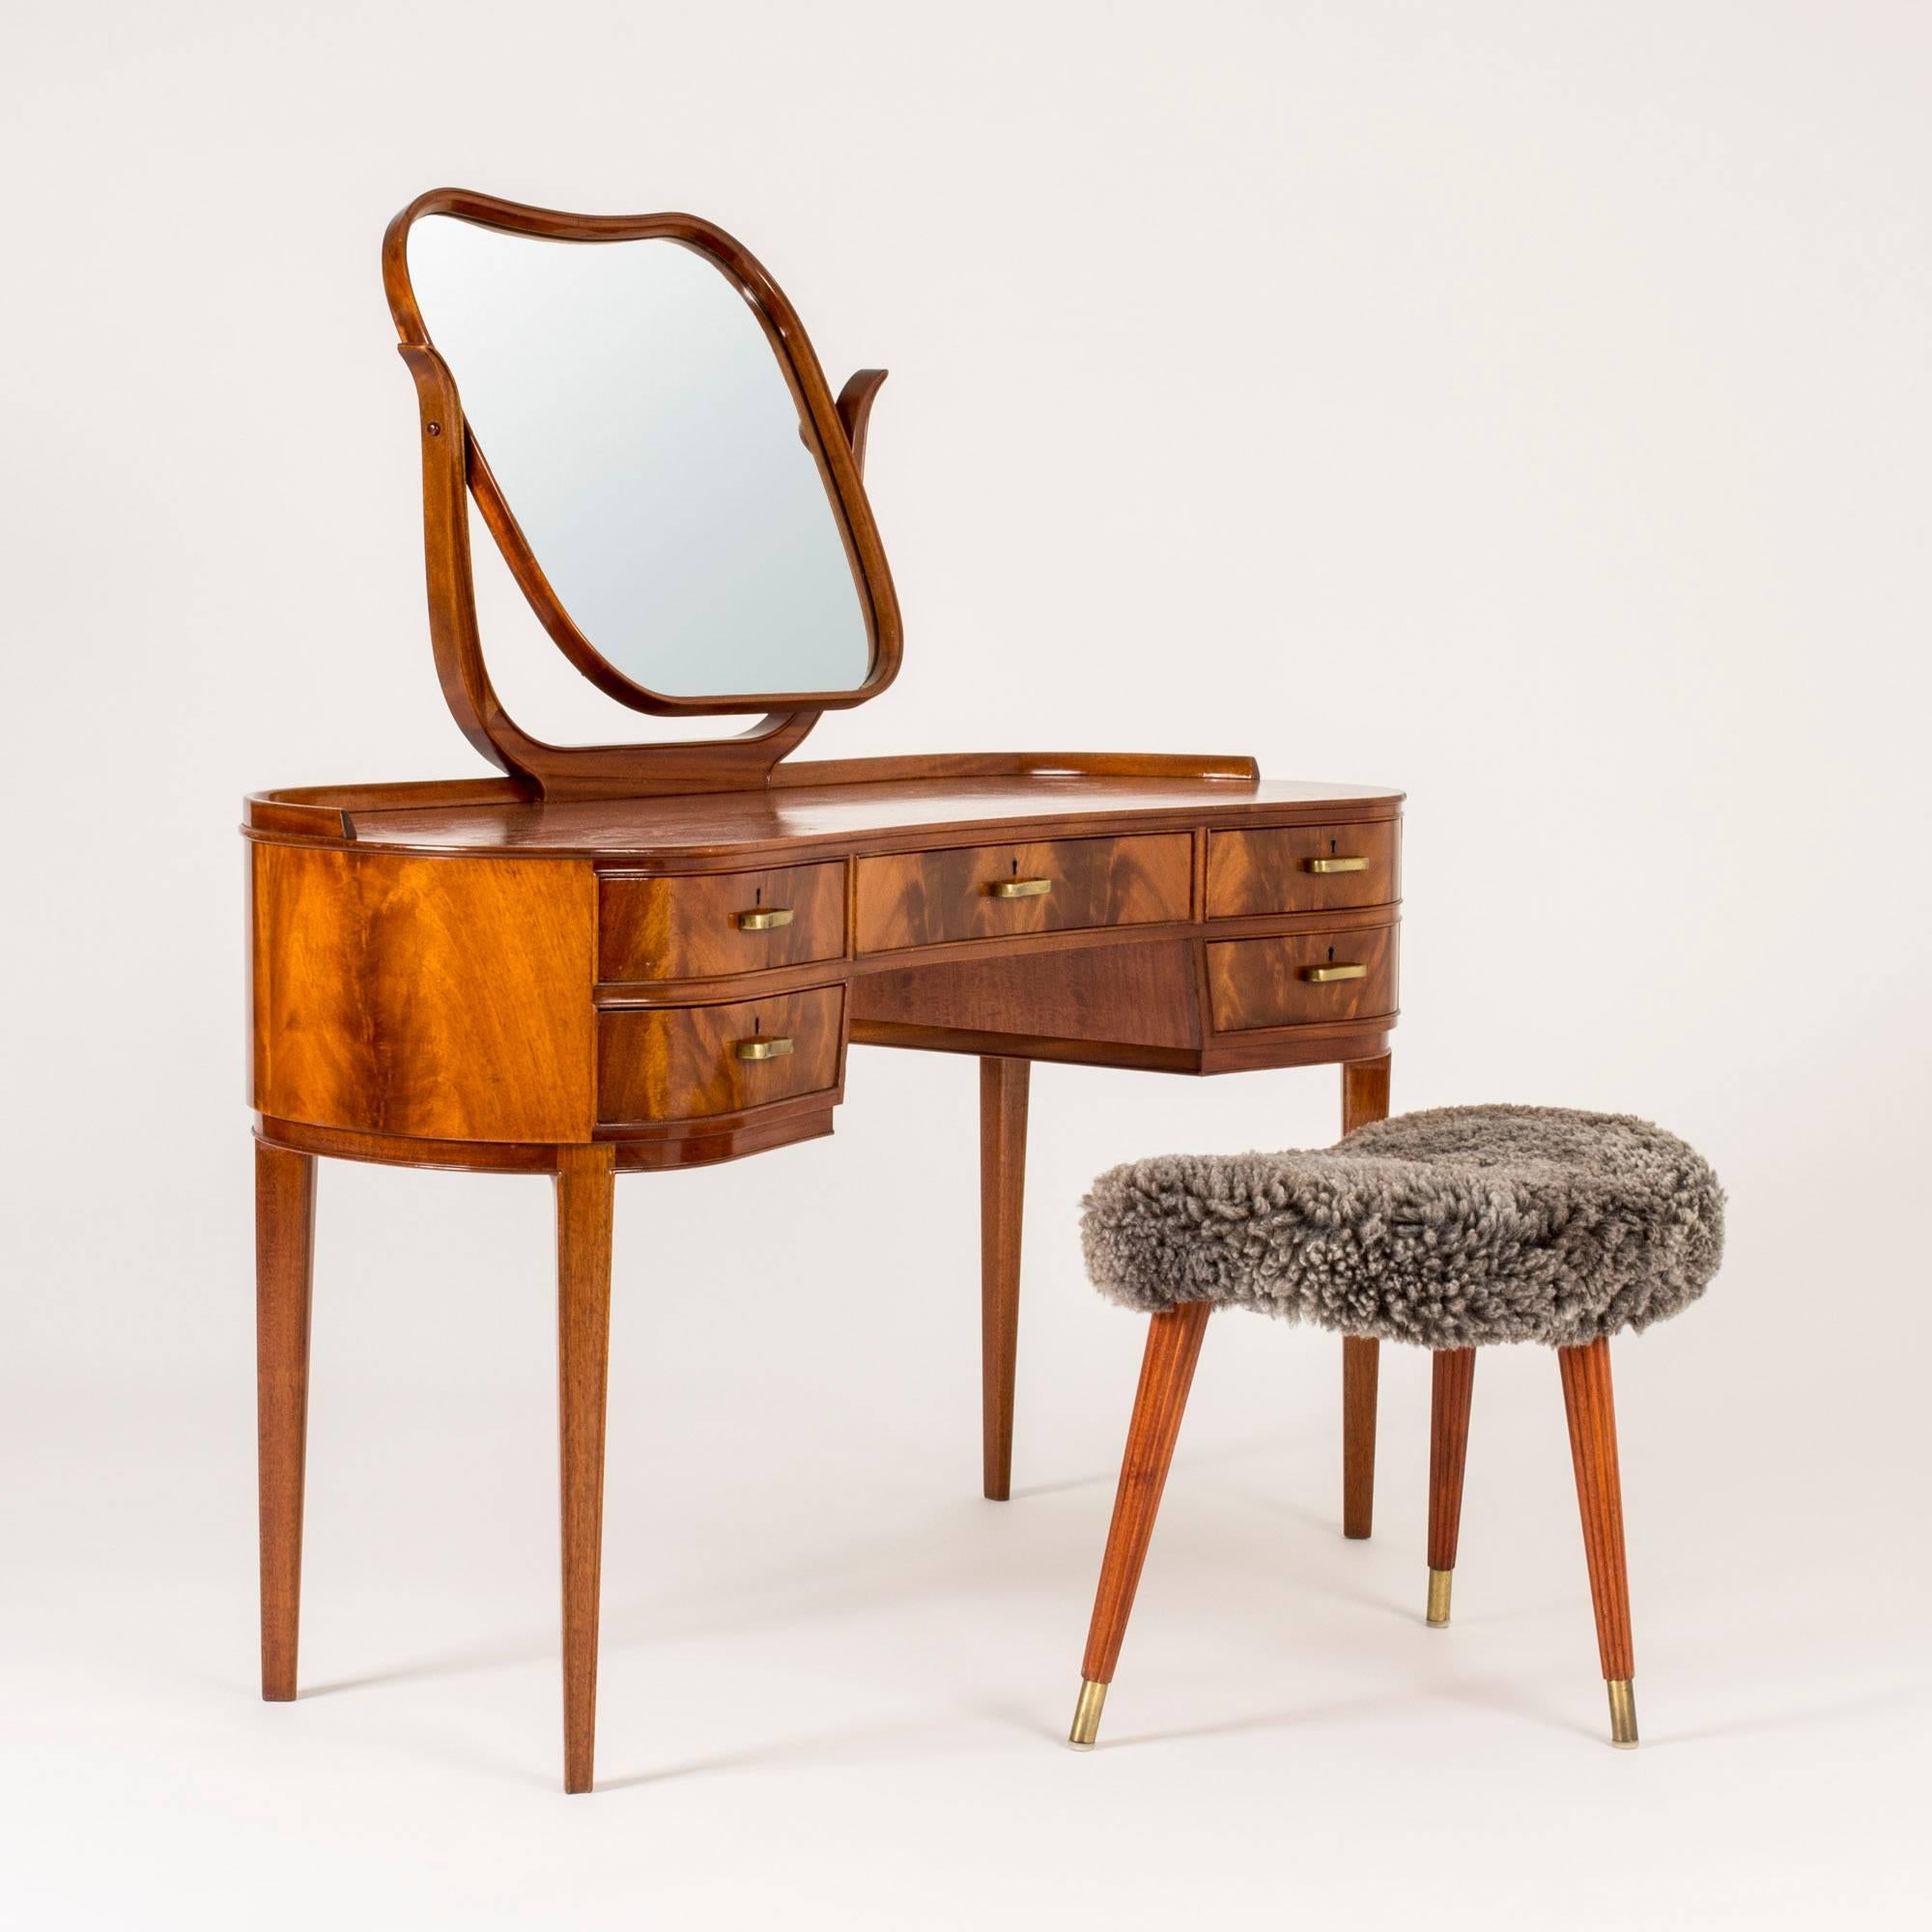 Mahogany dressing table by Axel Larsson with brass drawer handles. Beautiful flowing lines and details, mirror elegantly framed. Axel Larsson’s early furniture pieces from Bodafors are exquisite examples of Swedish Grace; beautiful, refined and